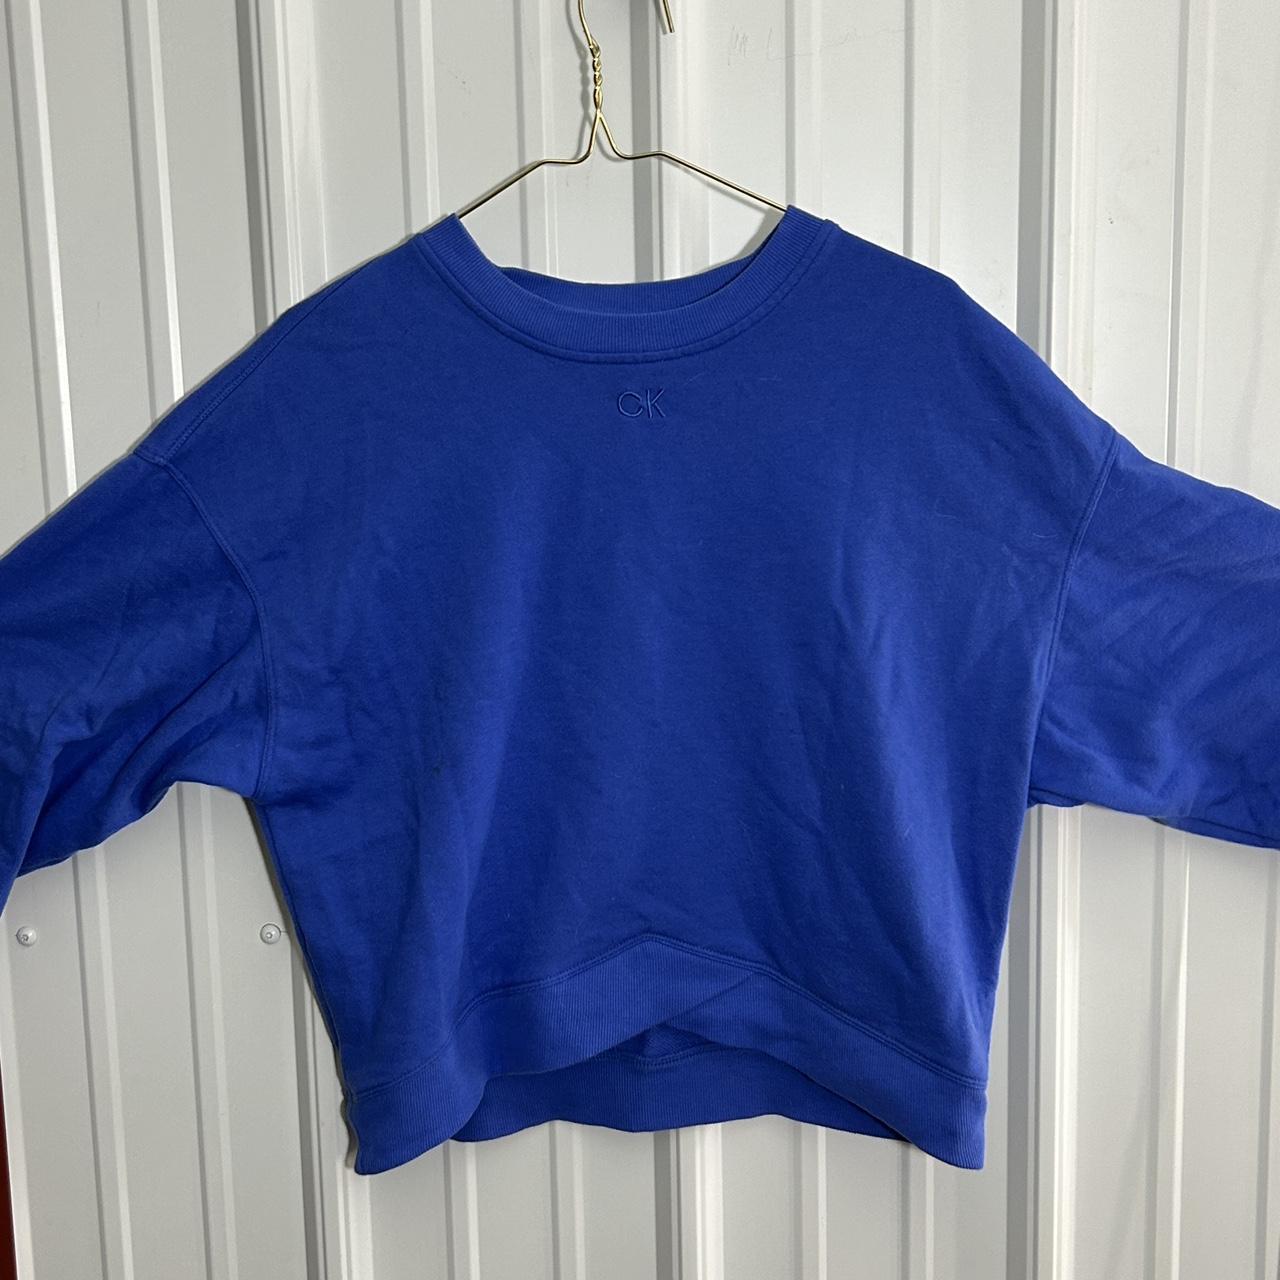 item listed by rayhastoomanyclothes